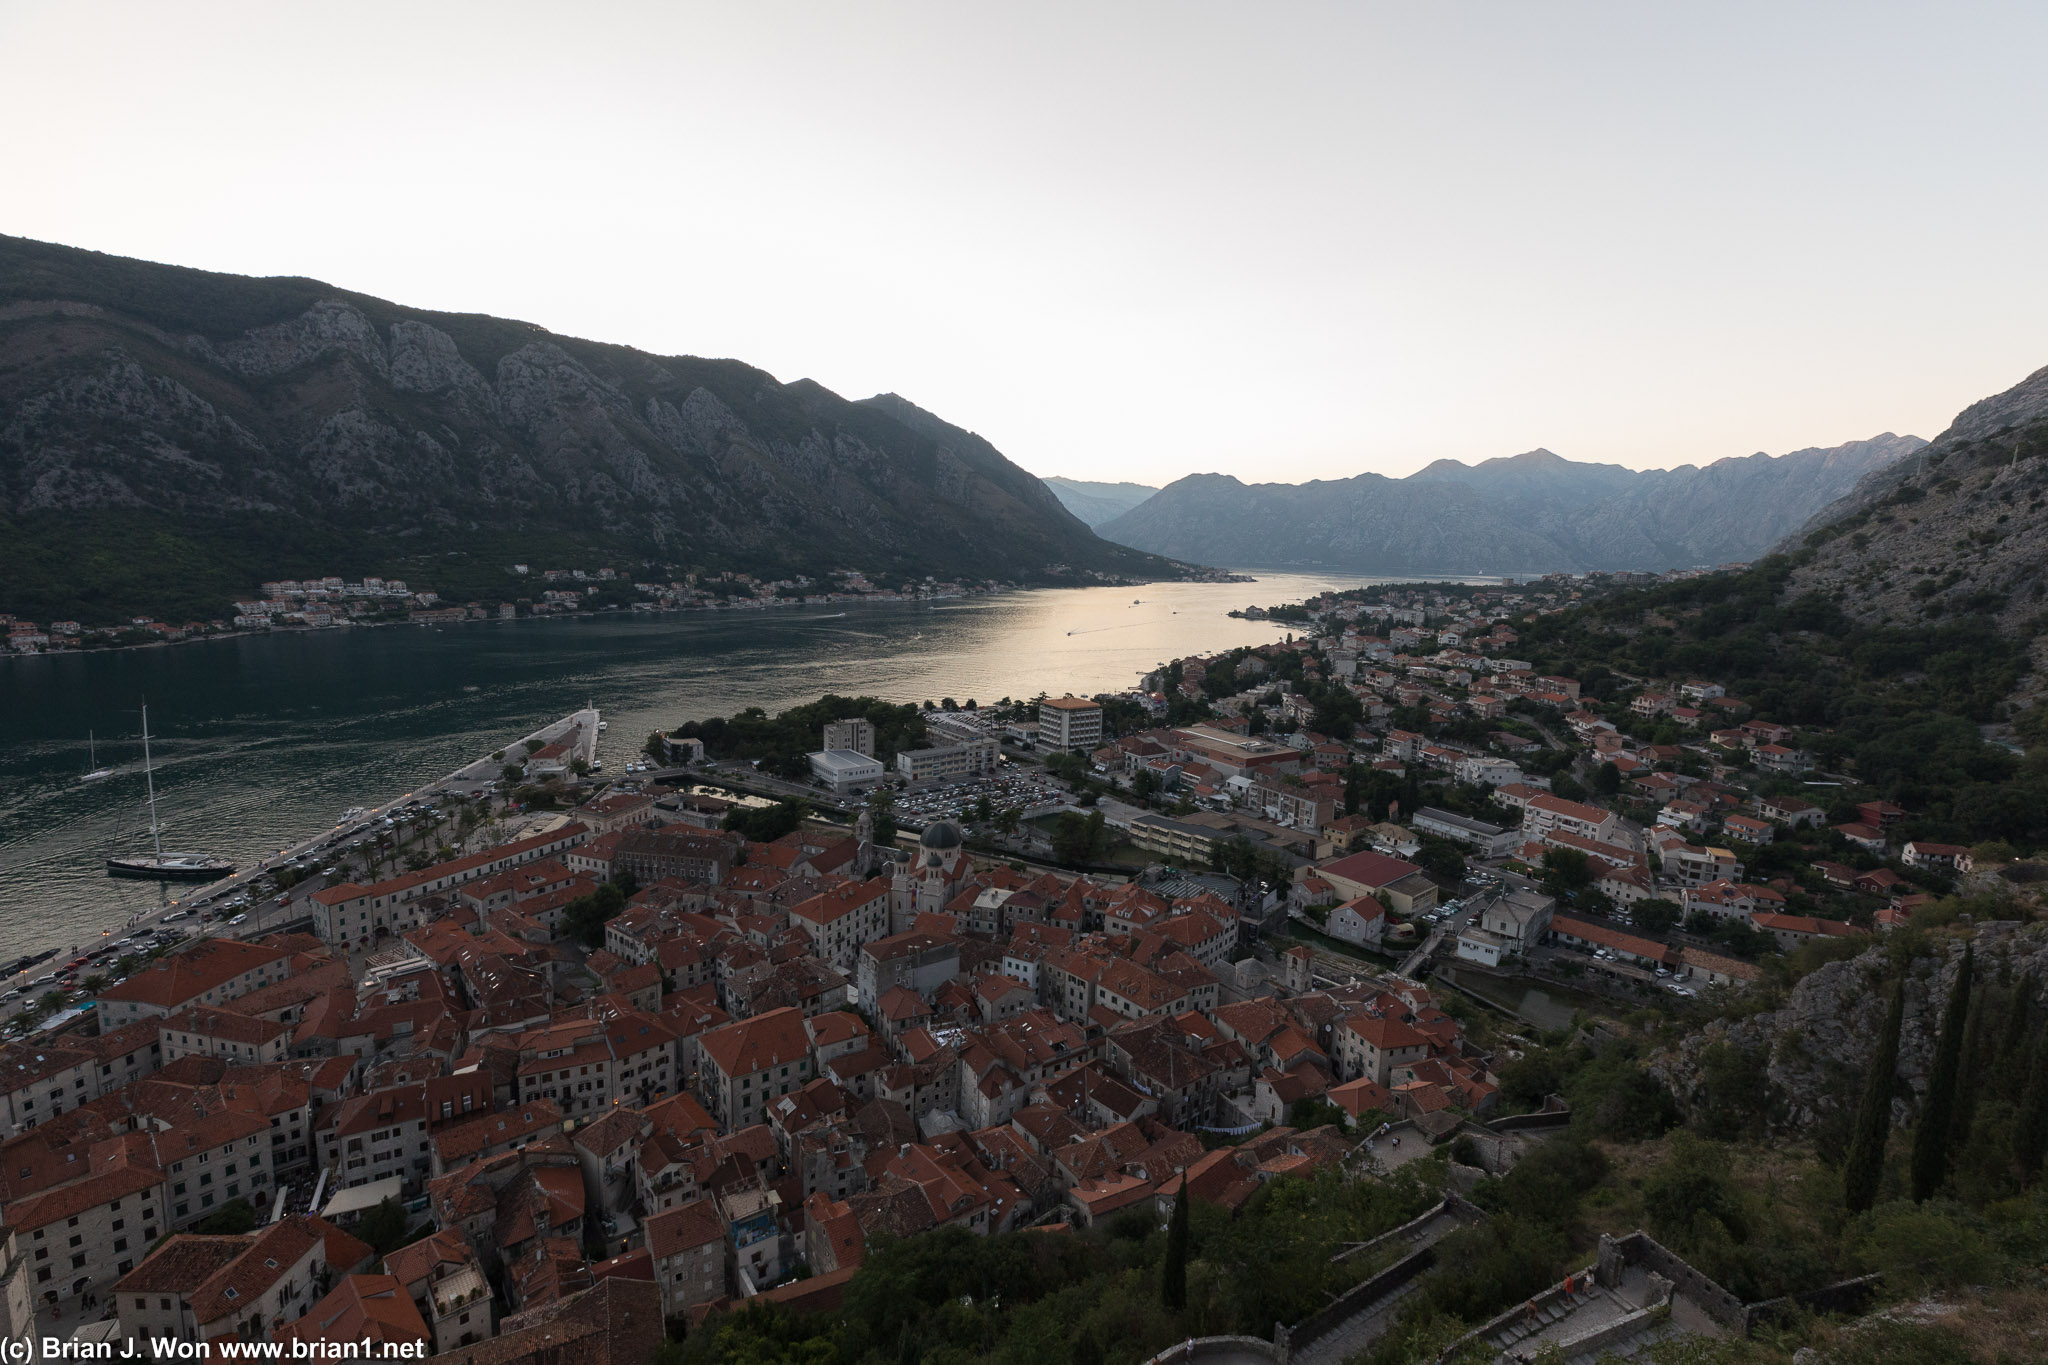 Looking down on Kotor from the path up to the fortress.